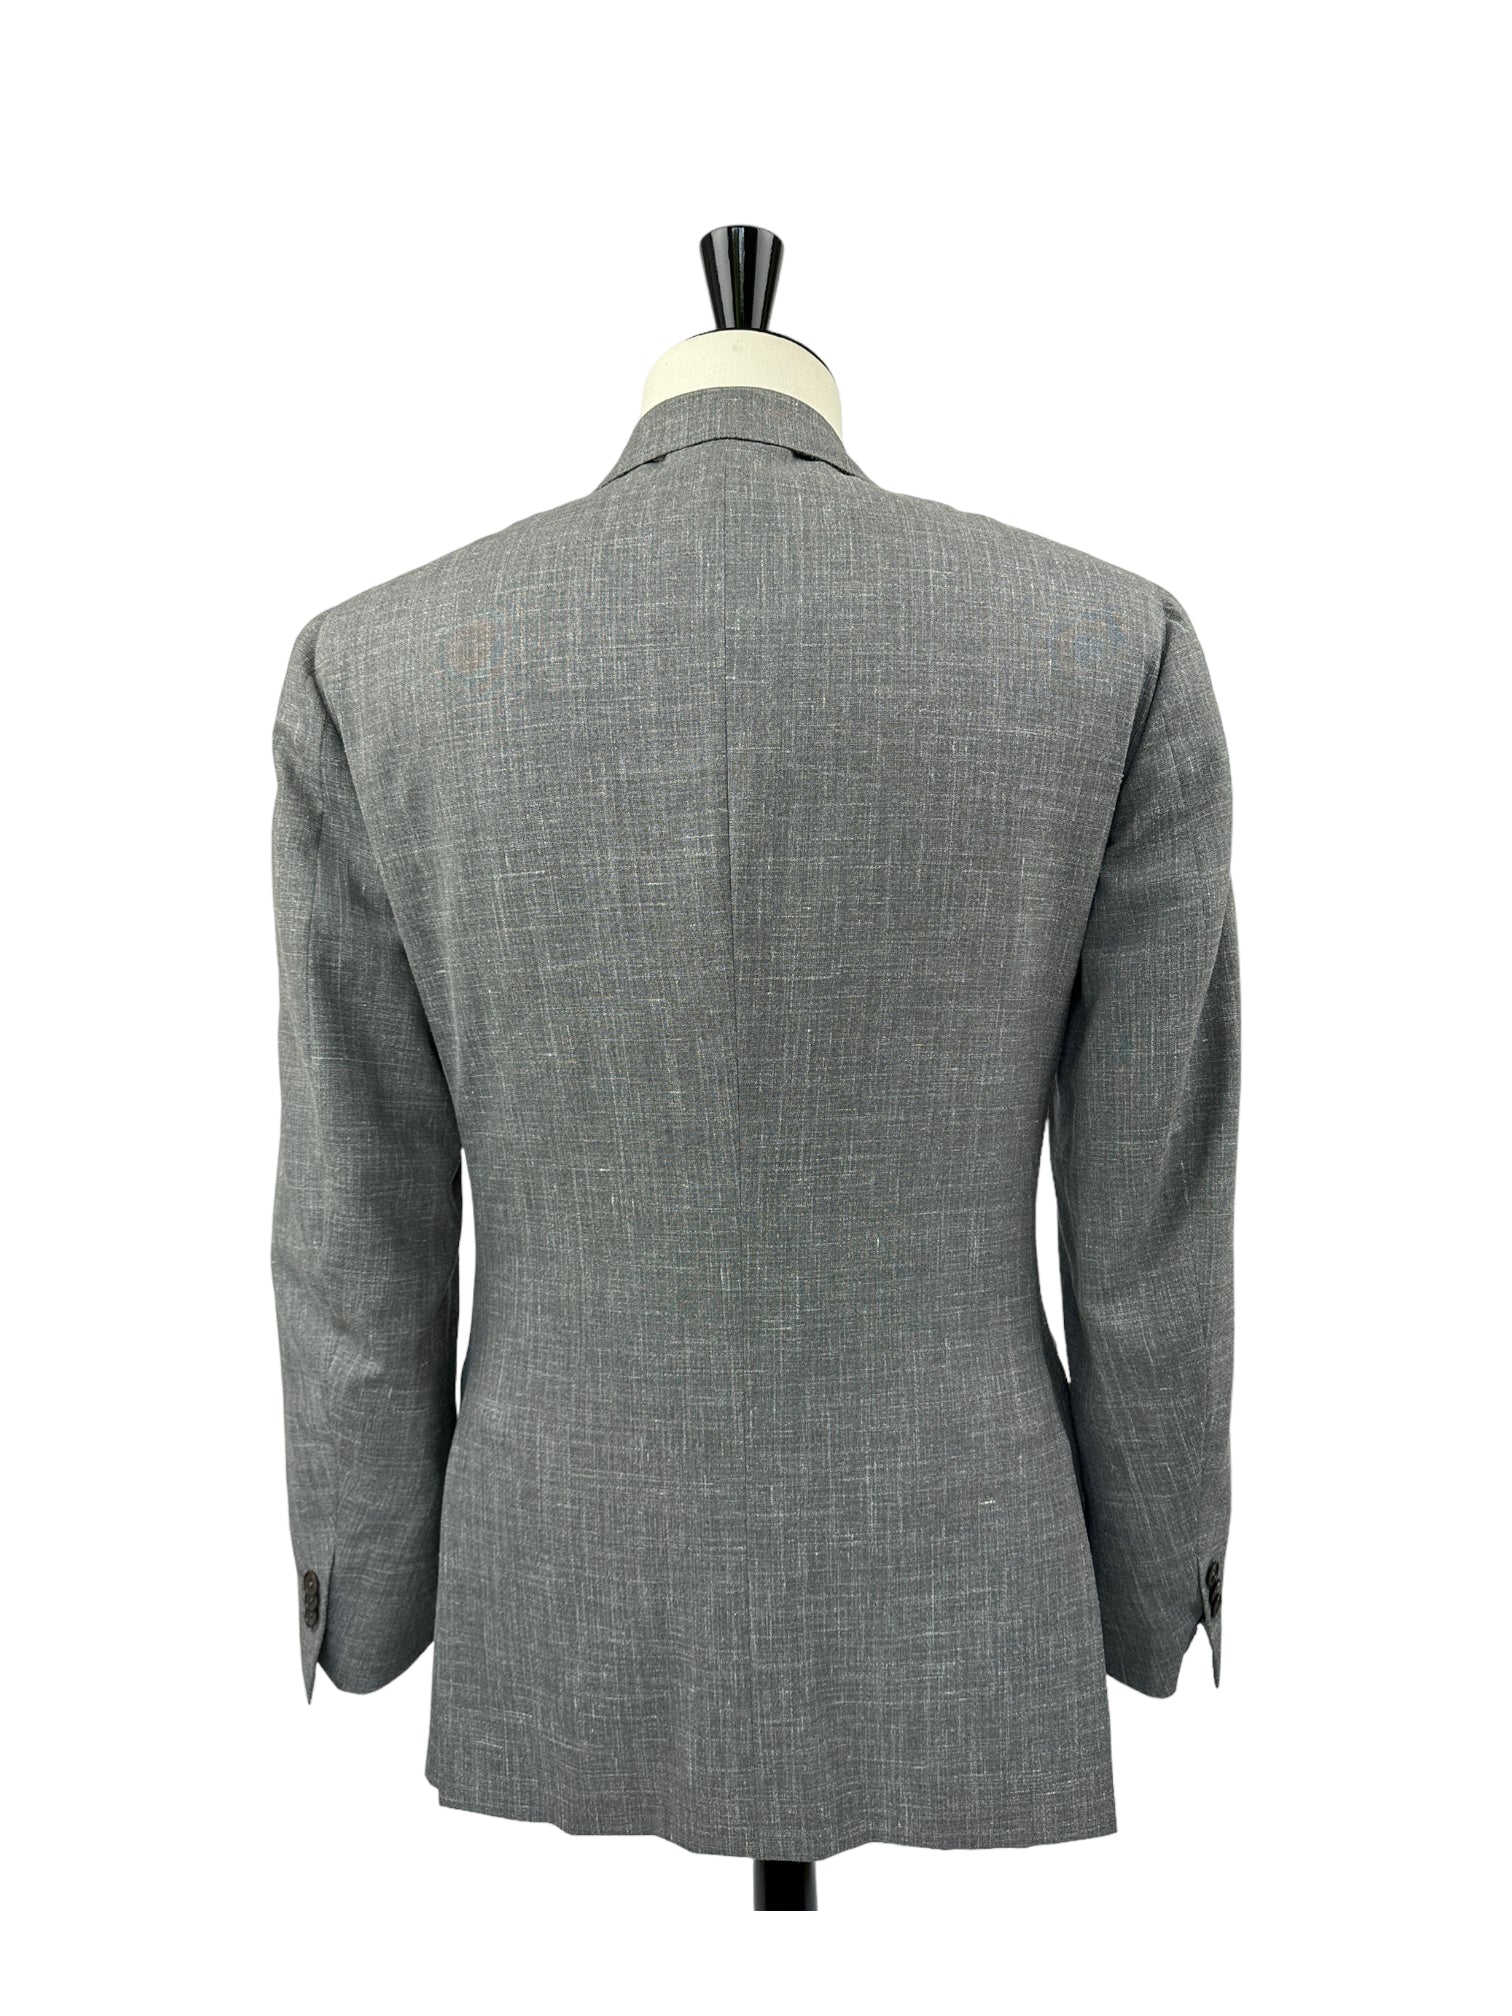 Isaia Taupe Wool, Silk and Linen Suit